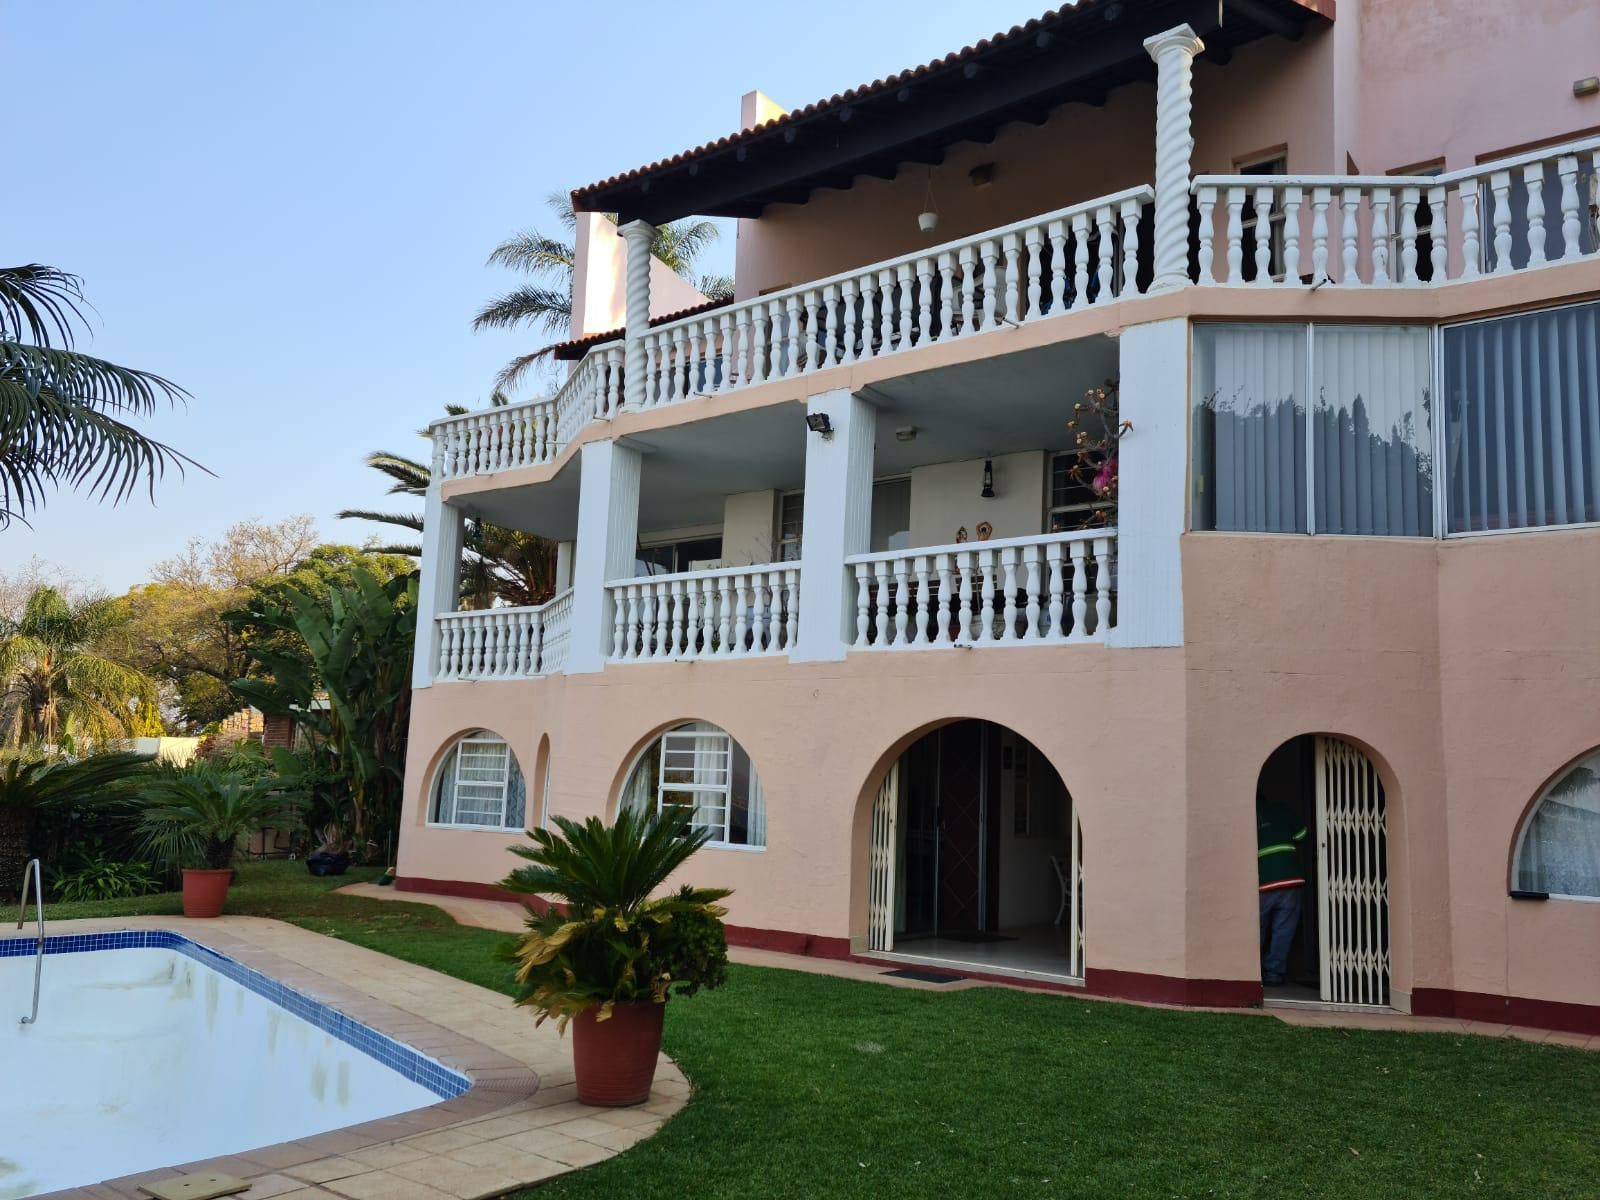 Kosmos View Luxury Self Catering Apartments Kosmos Hartbeespoort North West Province South Africa Balcony, Architecture, House, Building, Palm Tree, Plant, Nature, Wood, Swimming Pool